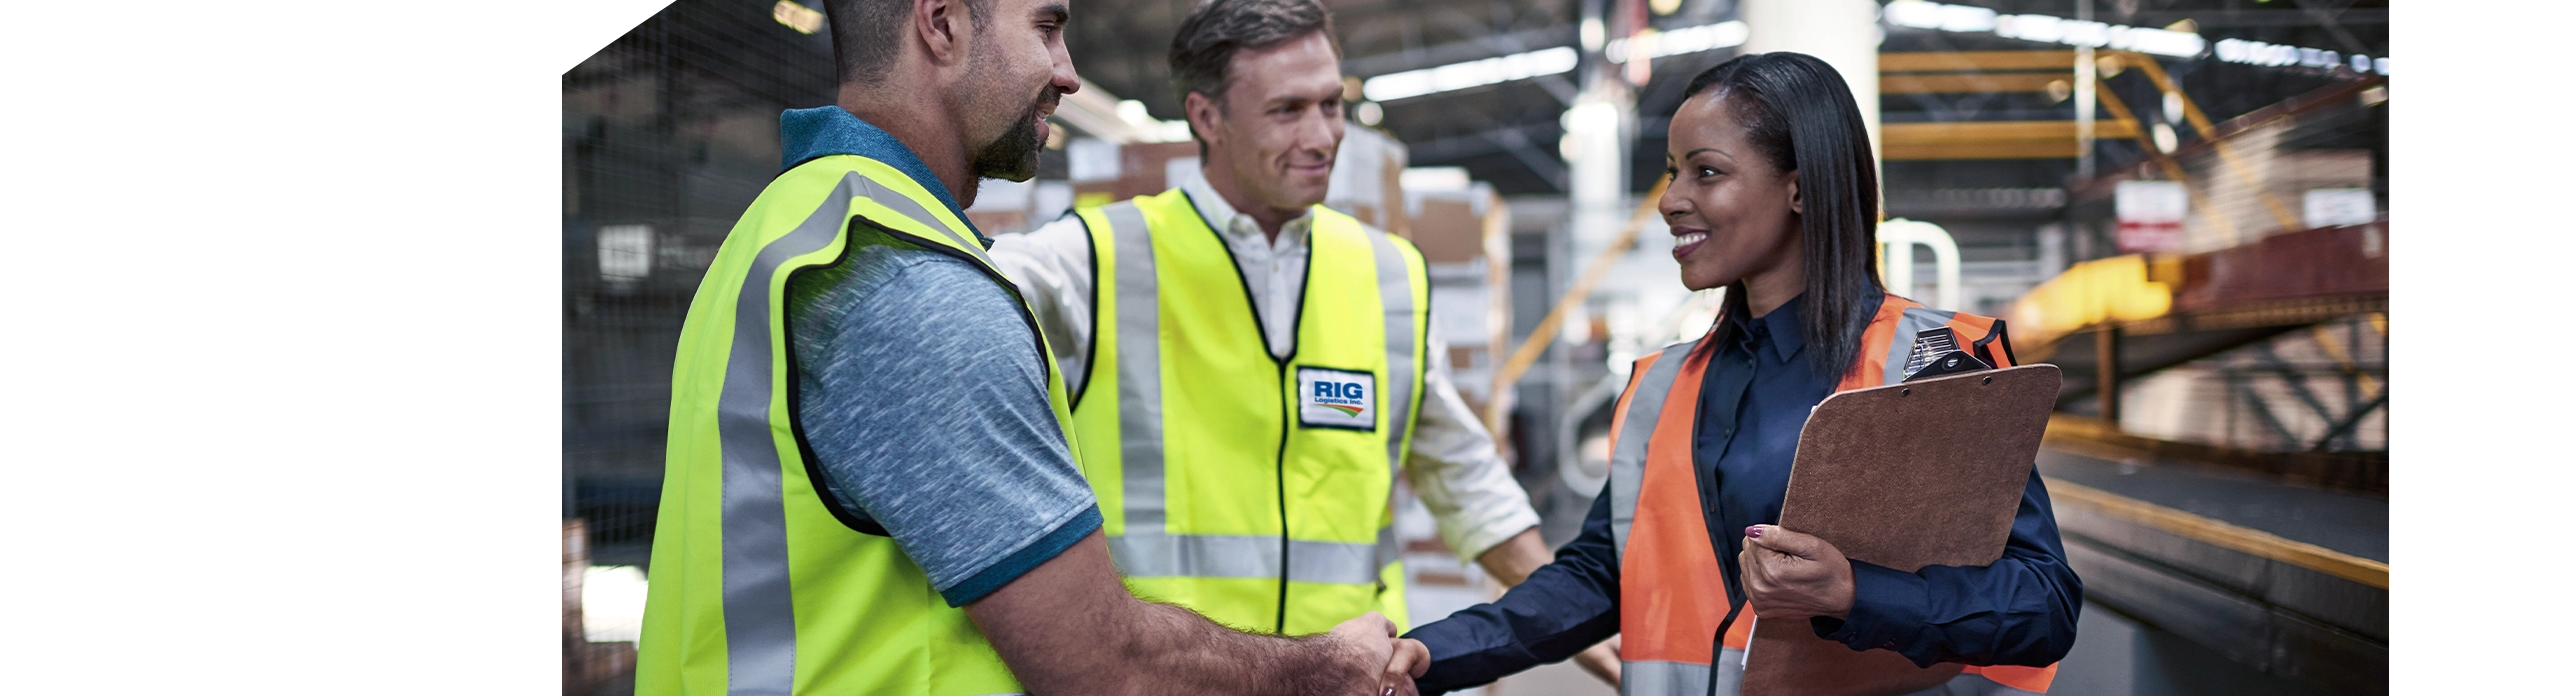 Three RIG Logistics employees meeting and shaking hands in warehousing facility